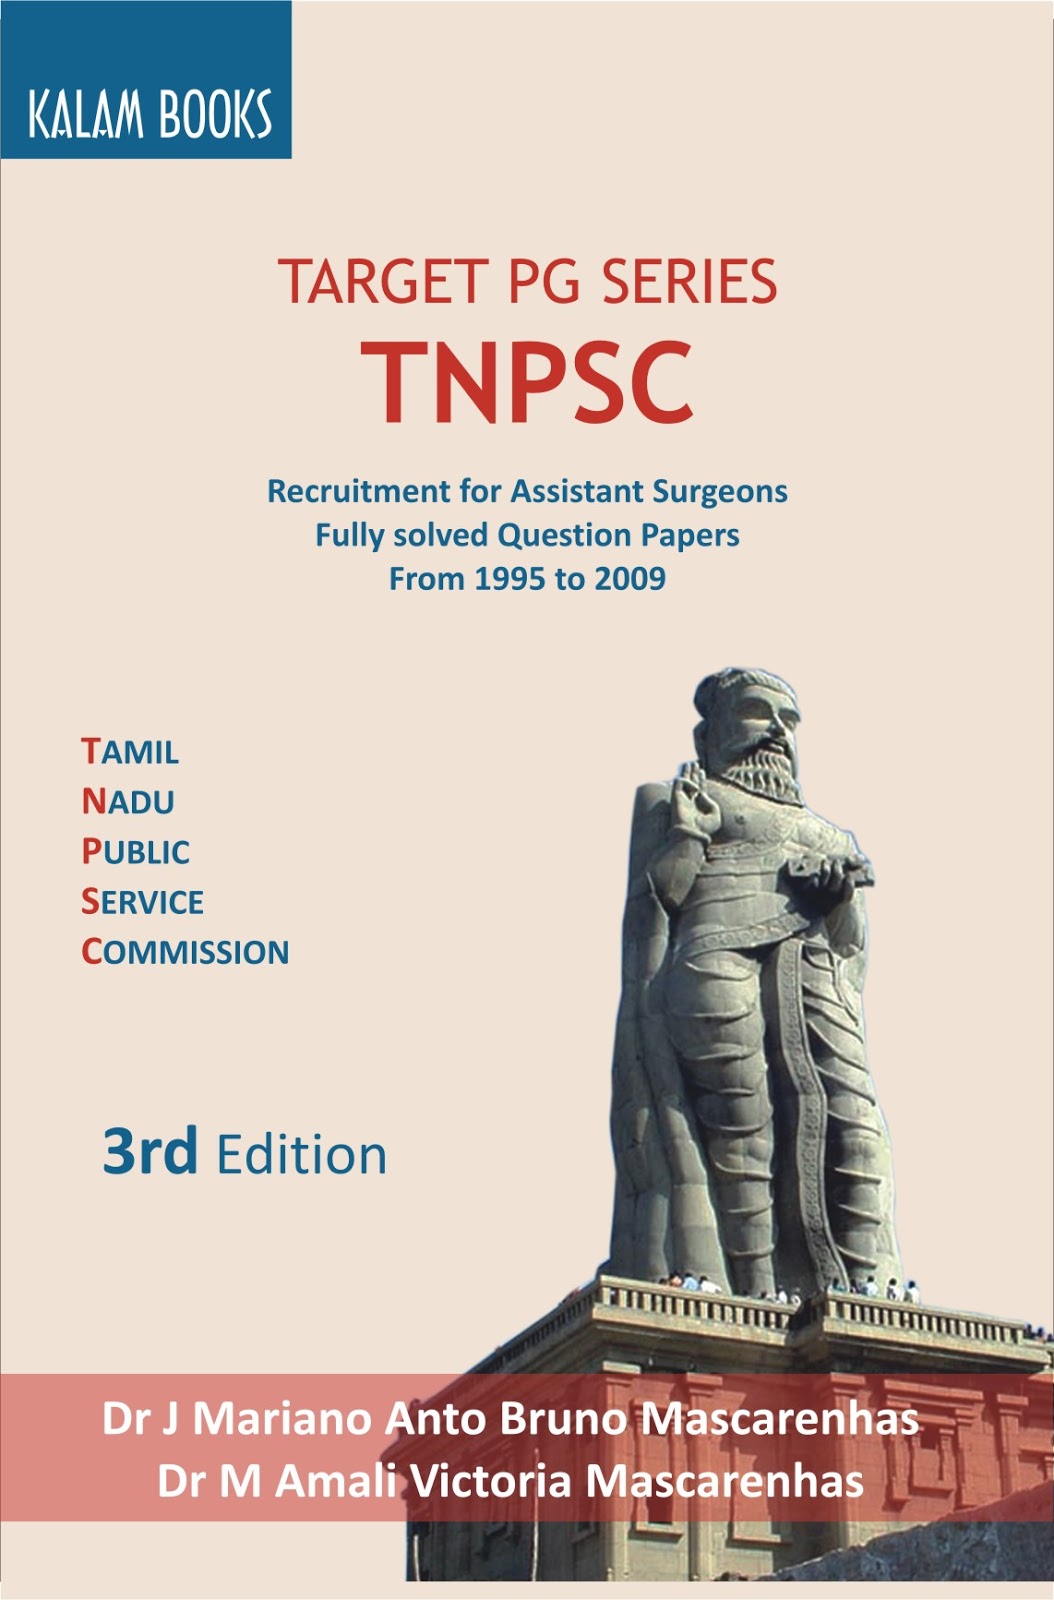 TNPSC Book : Target PG Series TNPSC 3rd Edition  (References and Explanations for All 18 Papers from 1995 to 2009)
